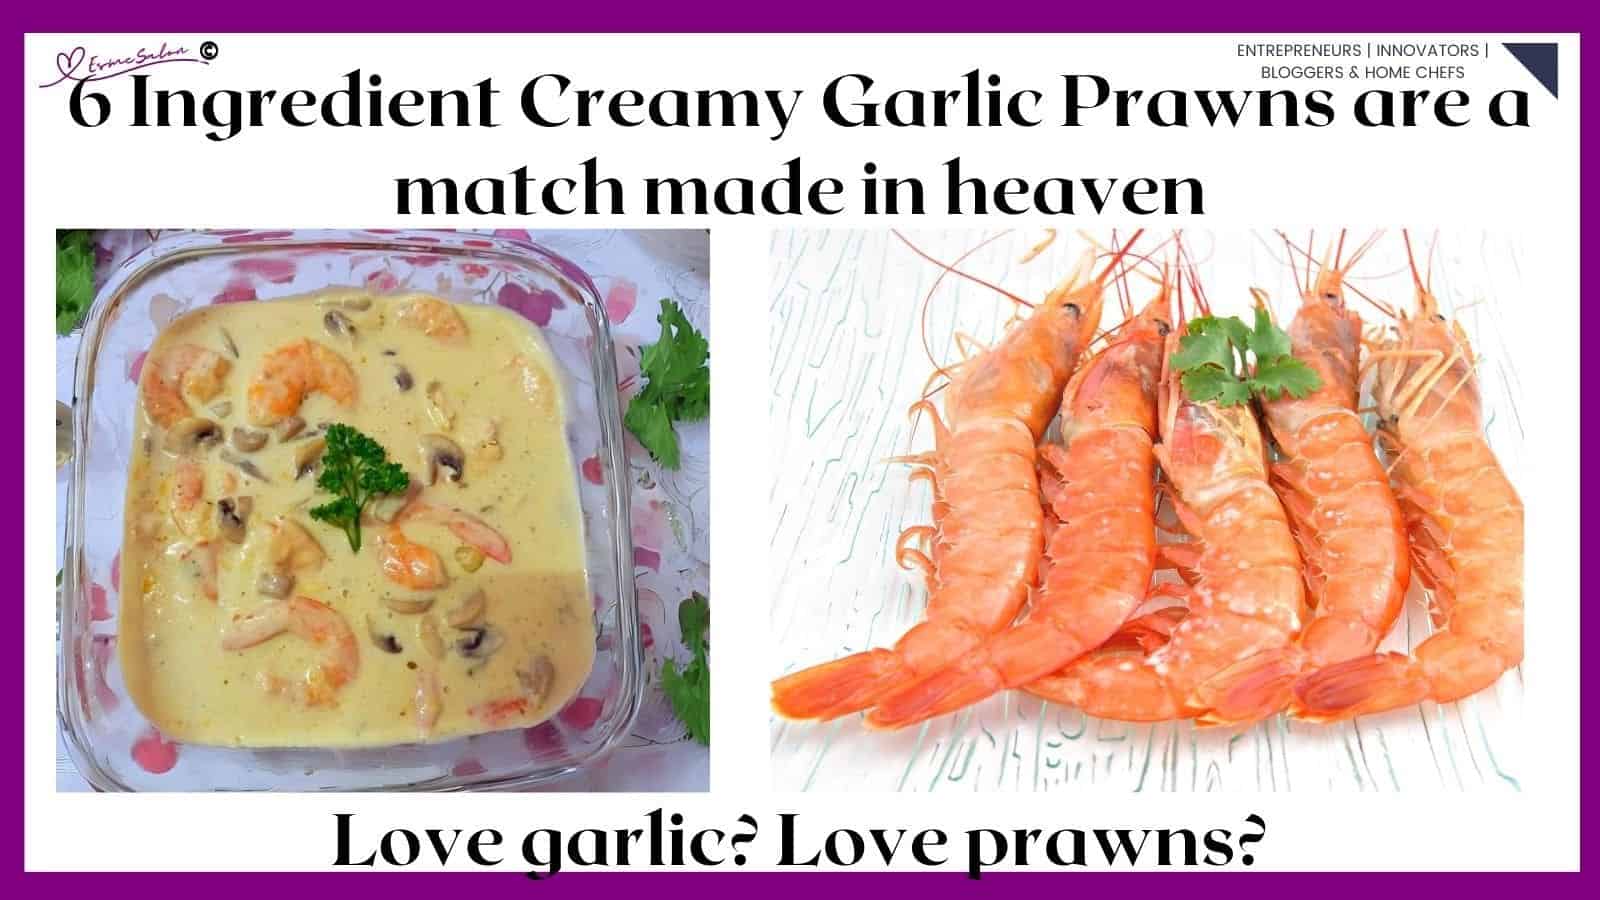 an image of a Pyrex dish filled with Creamy Garlic Prawns